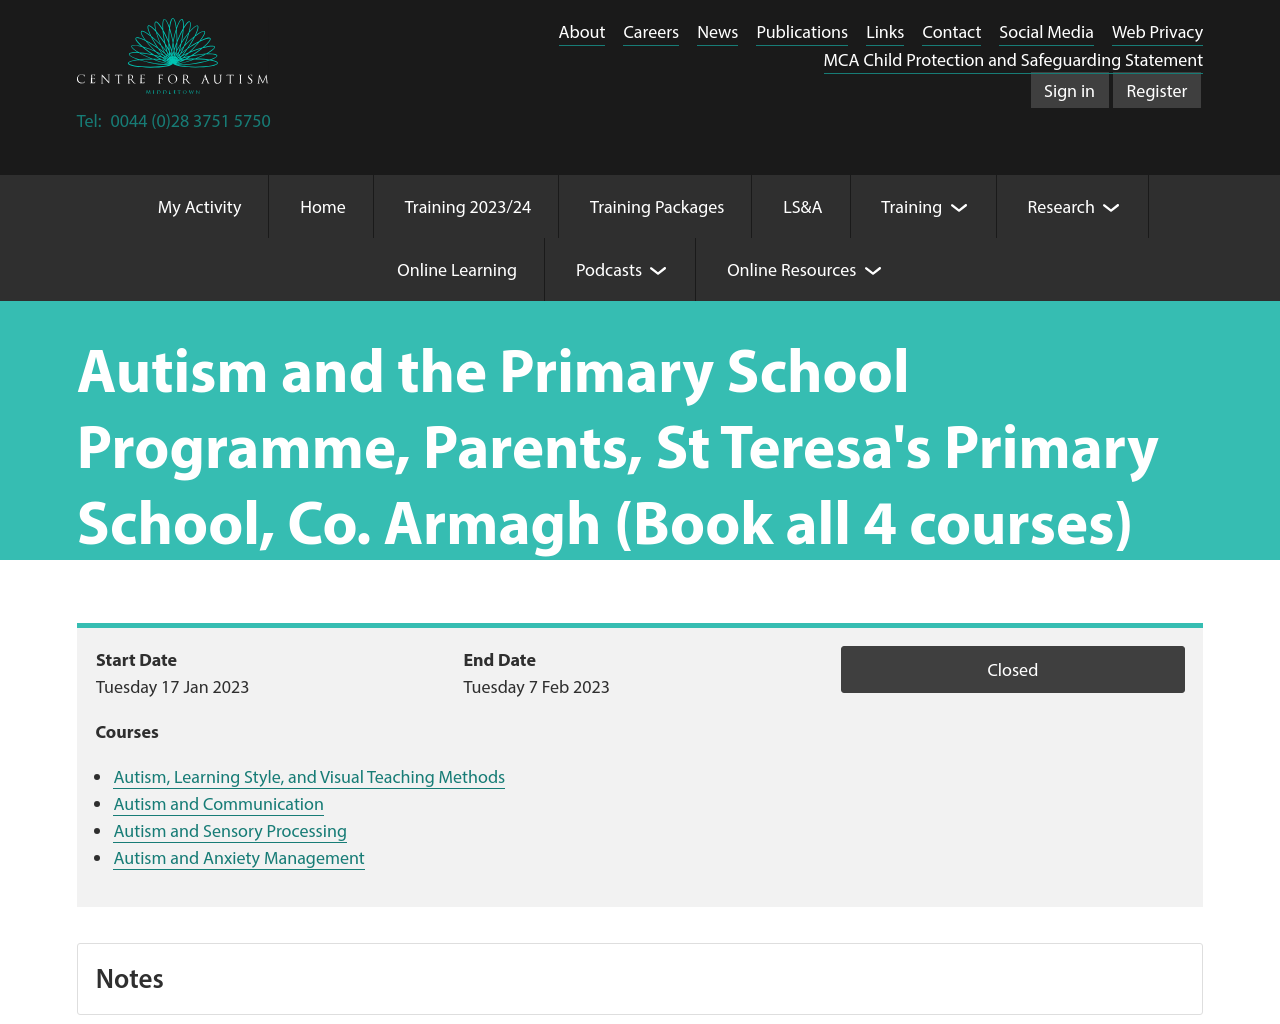 Autism and the Primary School Programme For Parents Co. Armagh (Book All 4 courses)